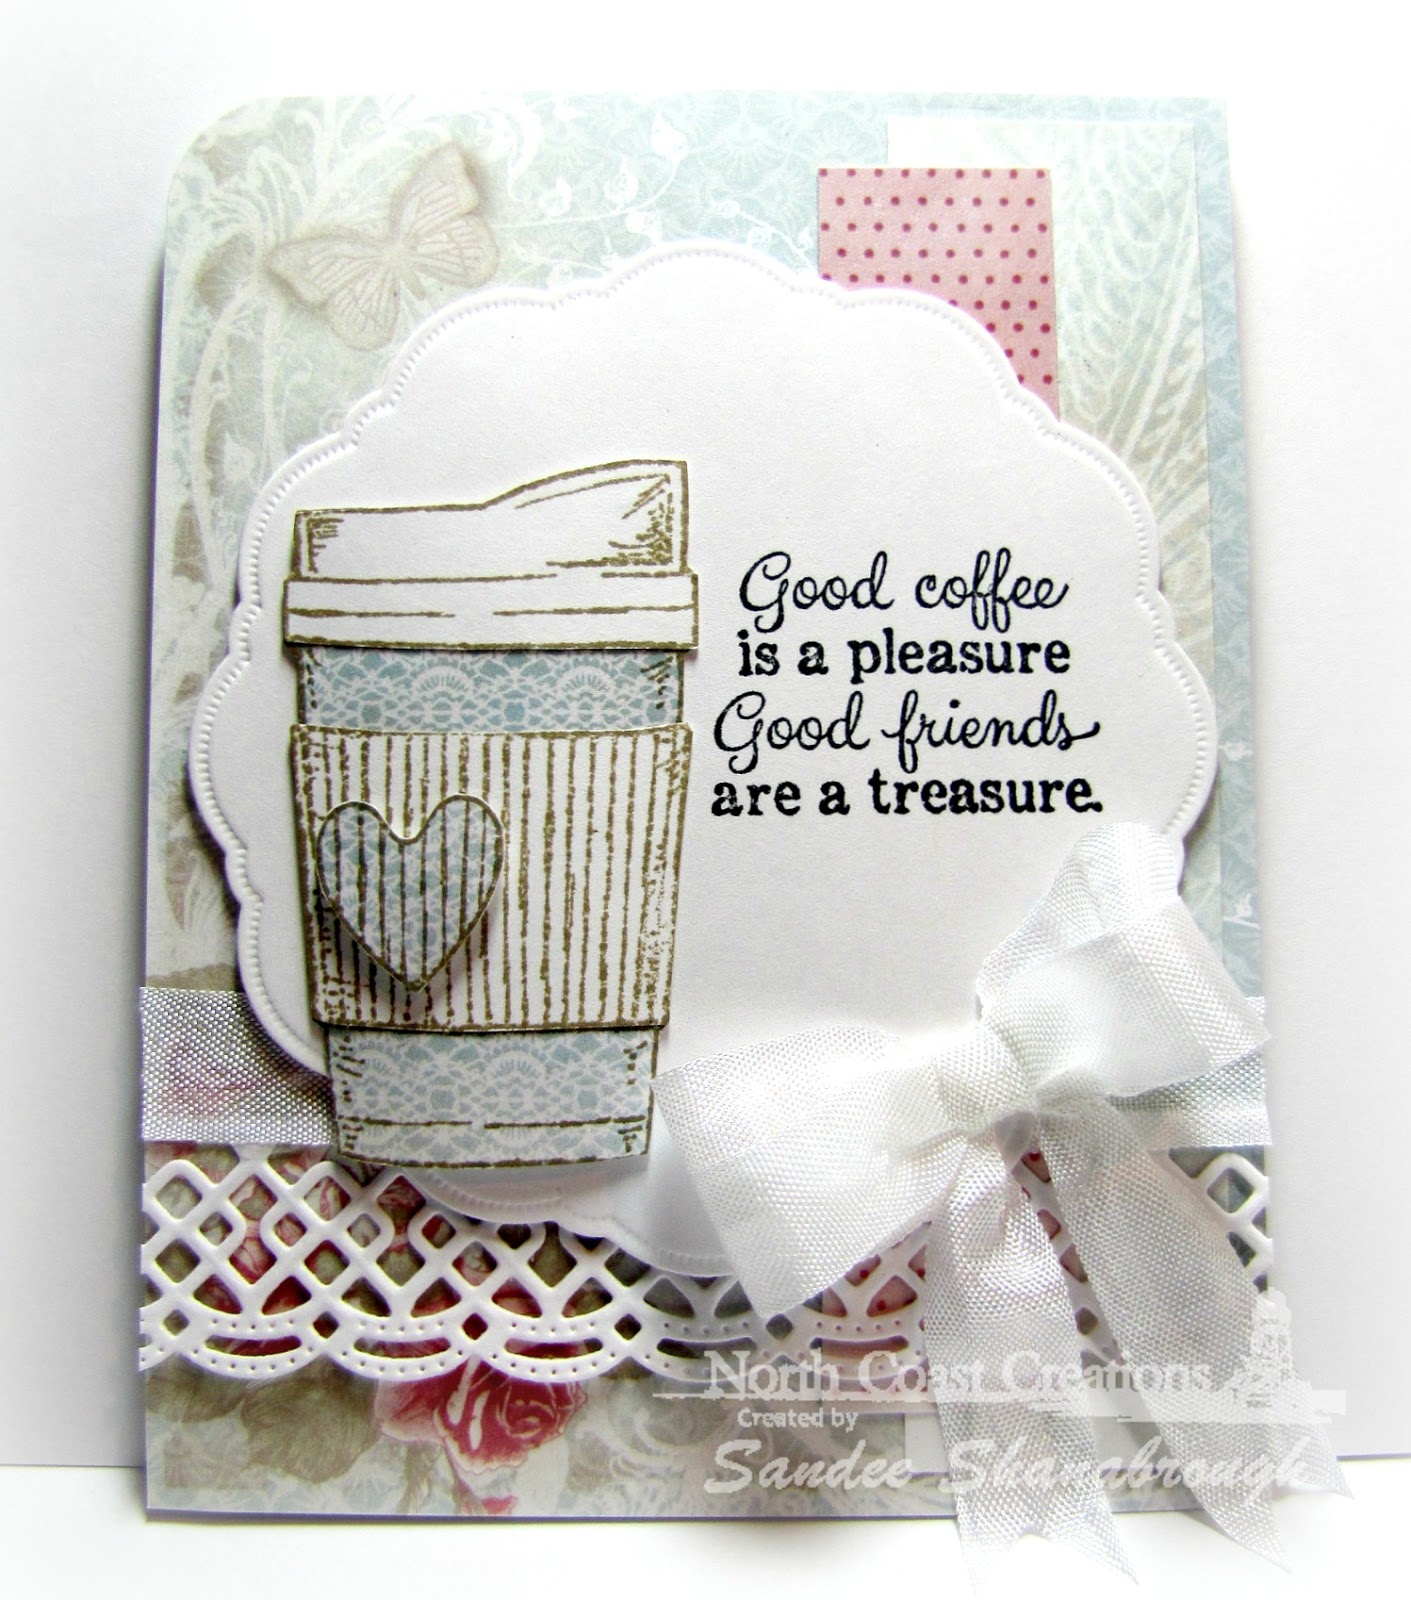 Stamps - North Coast Creations Warm My Heart, Our Daily Bread Designs Shabby Rose Paper Collection, ODBD Custom Doily Dies, ODBD Custom Beautiful Border Dies